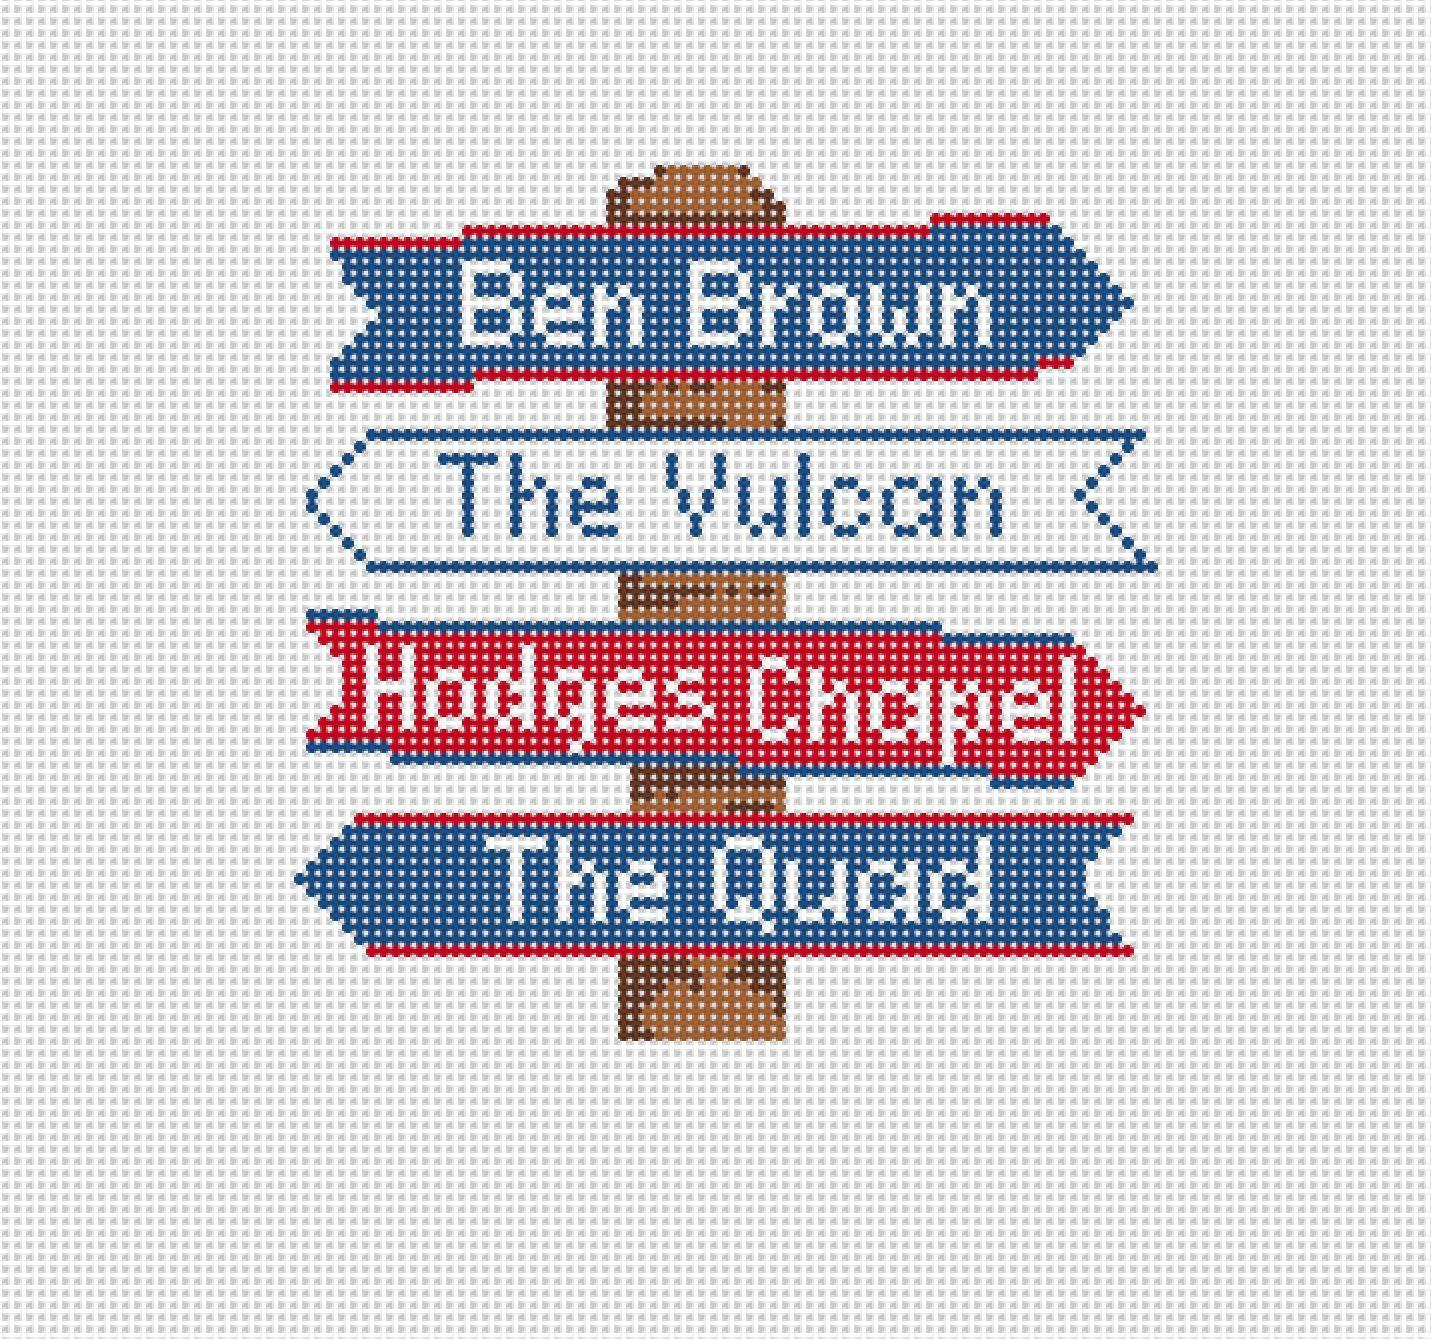 Samford College Icon Destination Sign - Needlepoint by Laura